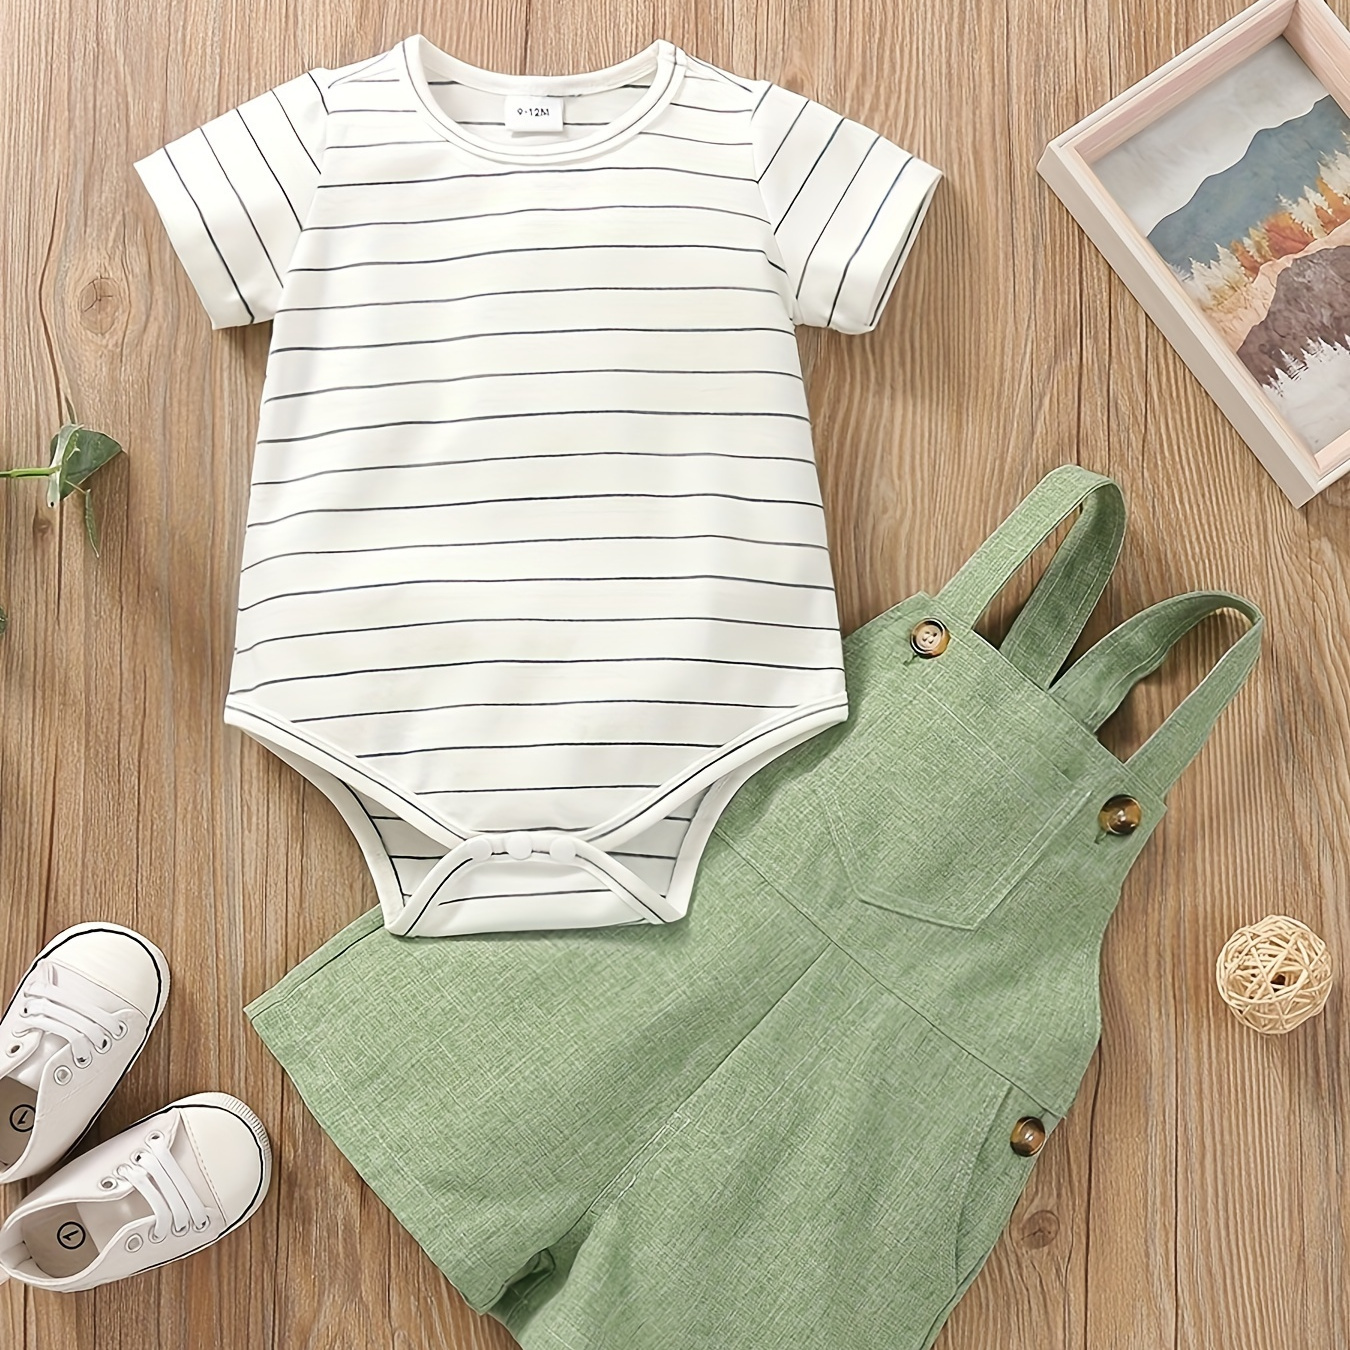 

Baby's Stripe Pattern 2pcs Summer Casual Outfit, Short Sleeve Triangle Onesie & Overall Shorts Set, Toddler & Infant Boy's Clothes